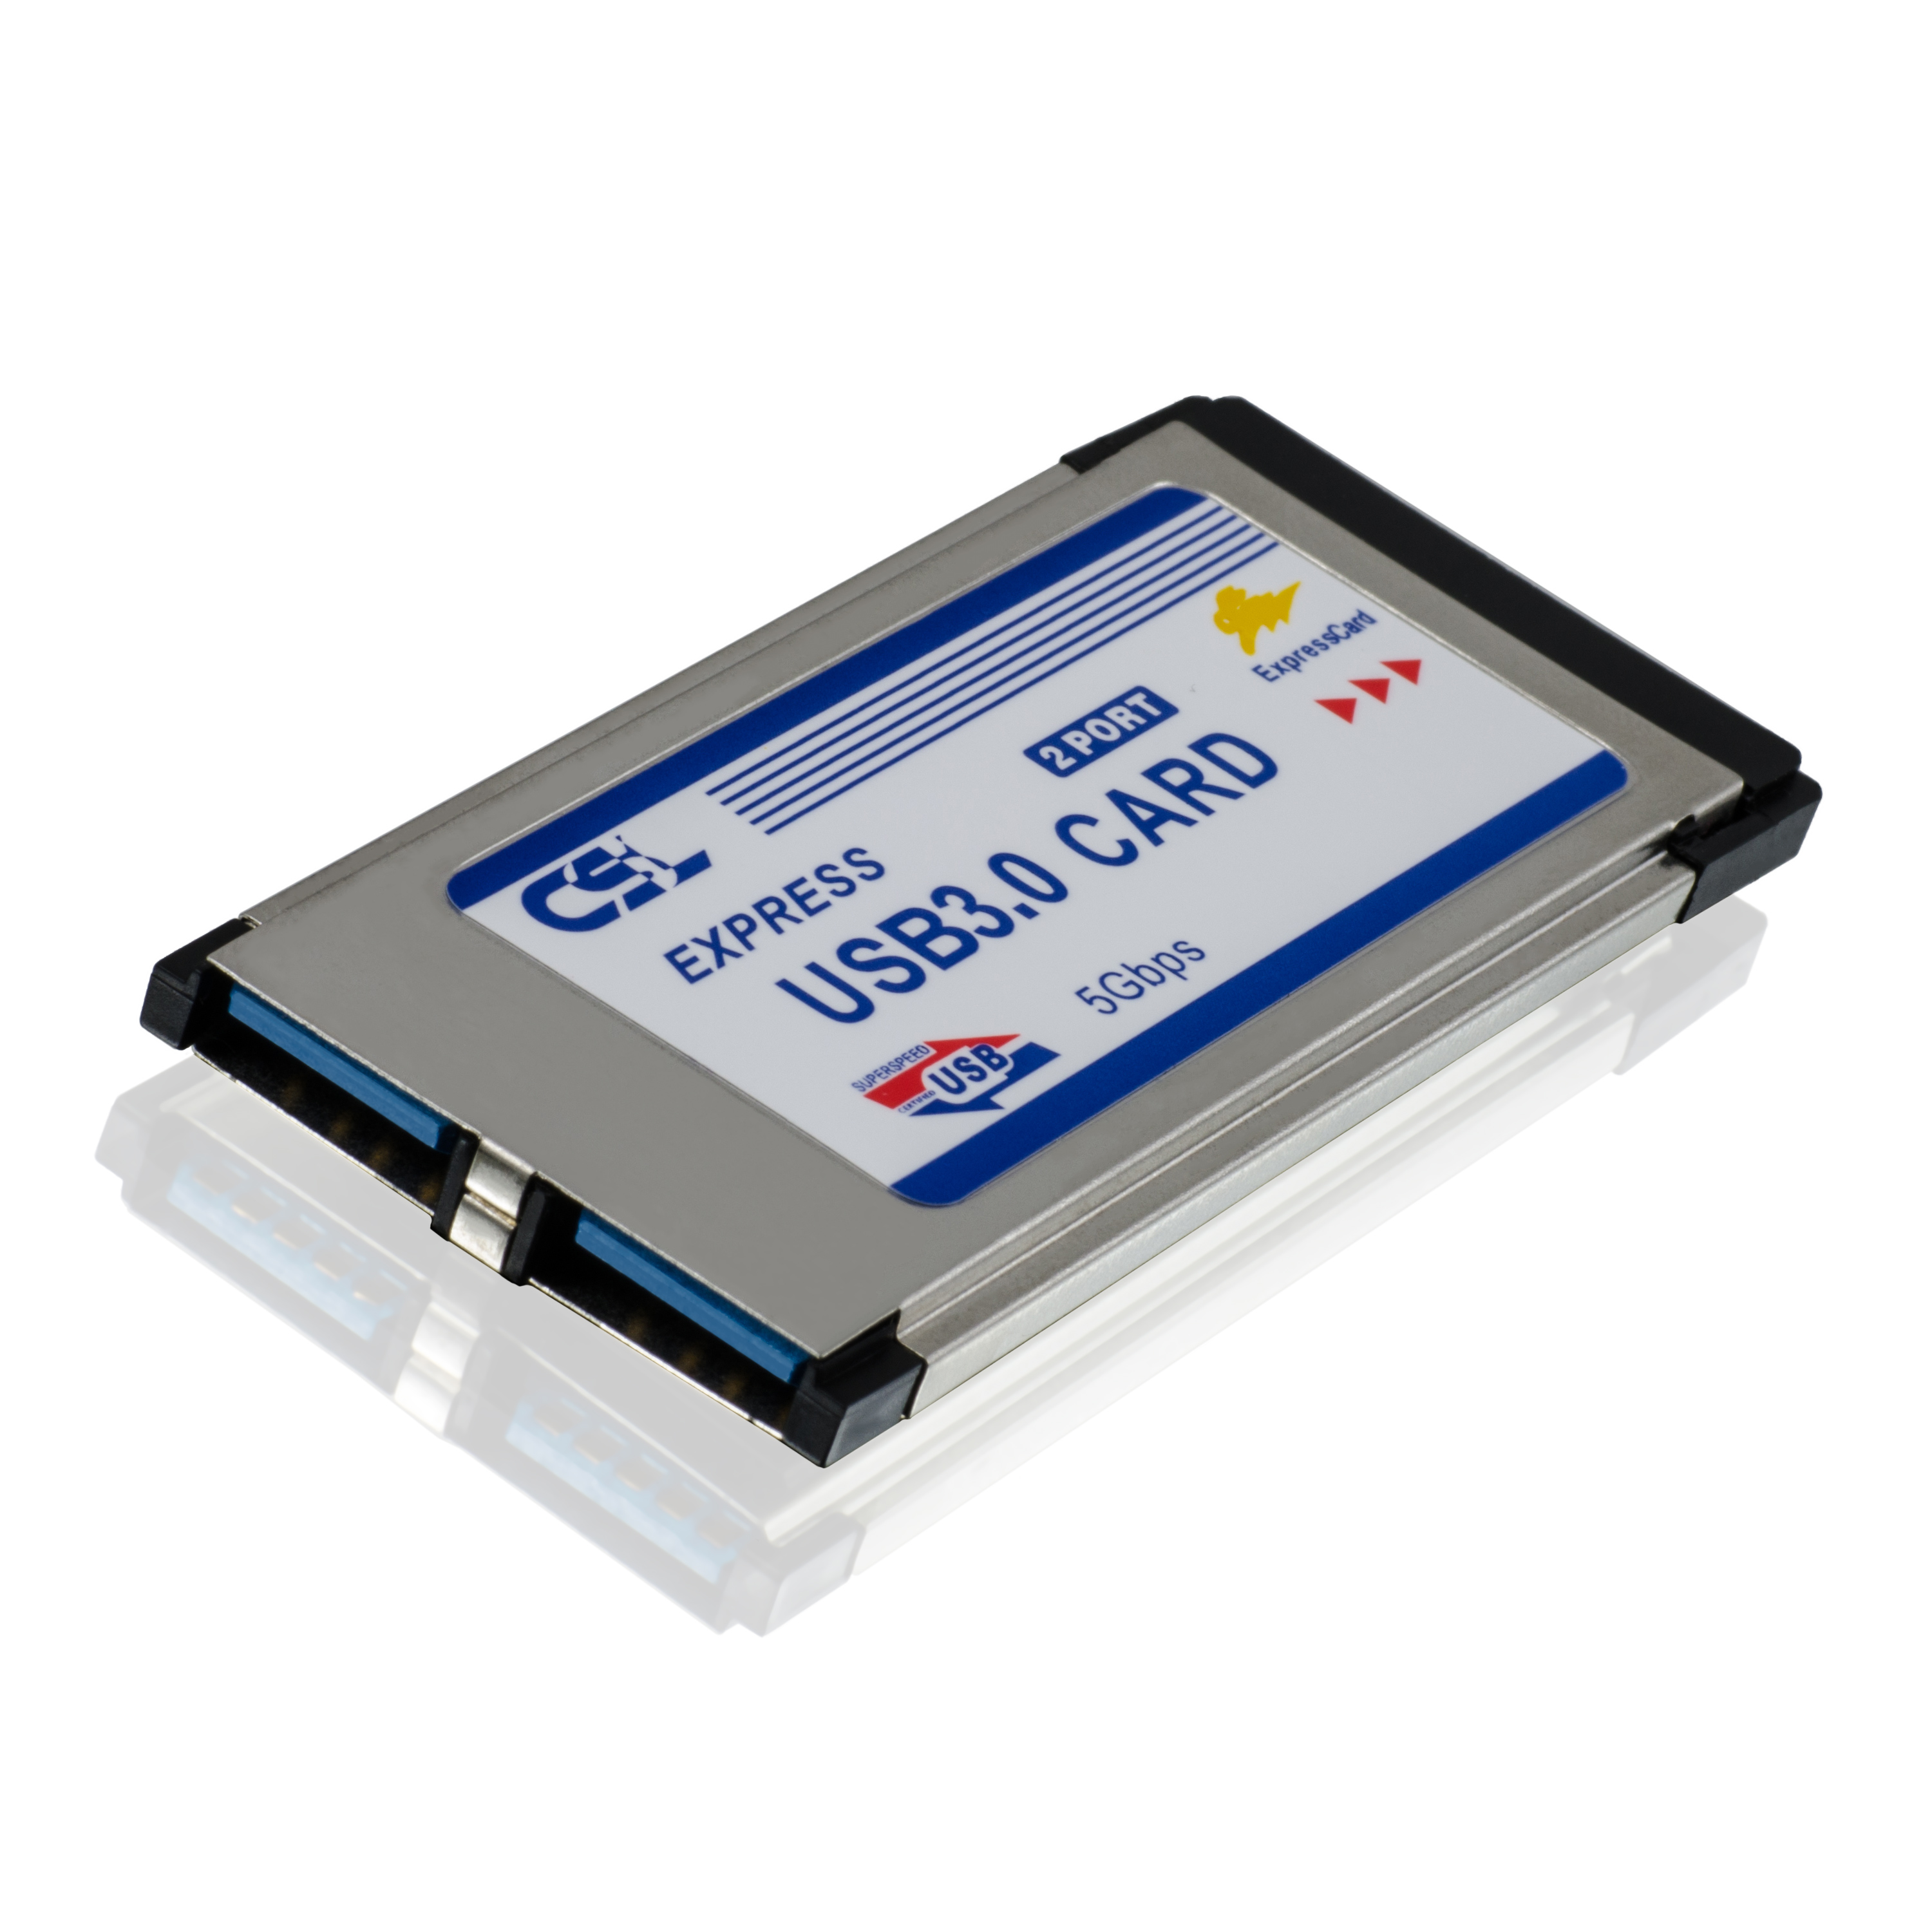 PCMCIA Express Card Card 34mm 2 Port usb3.0 win7 compatible for